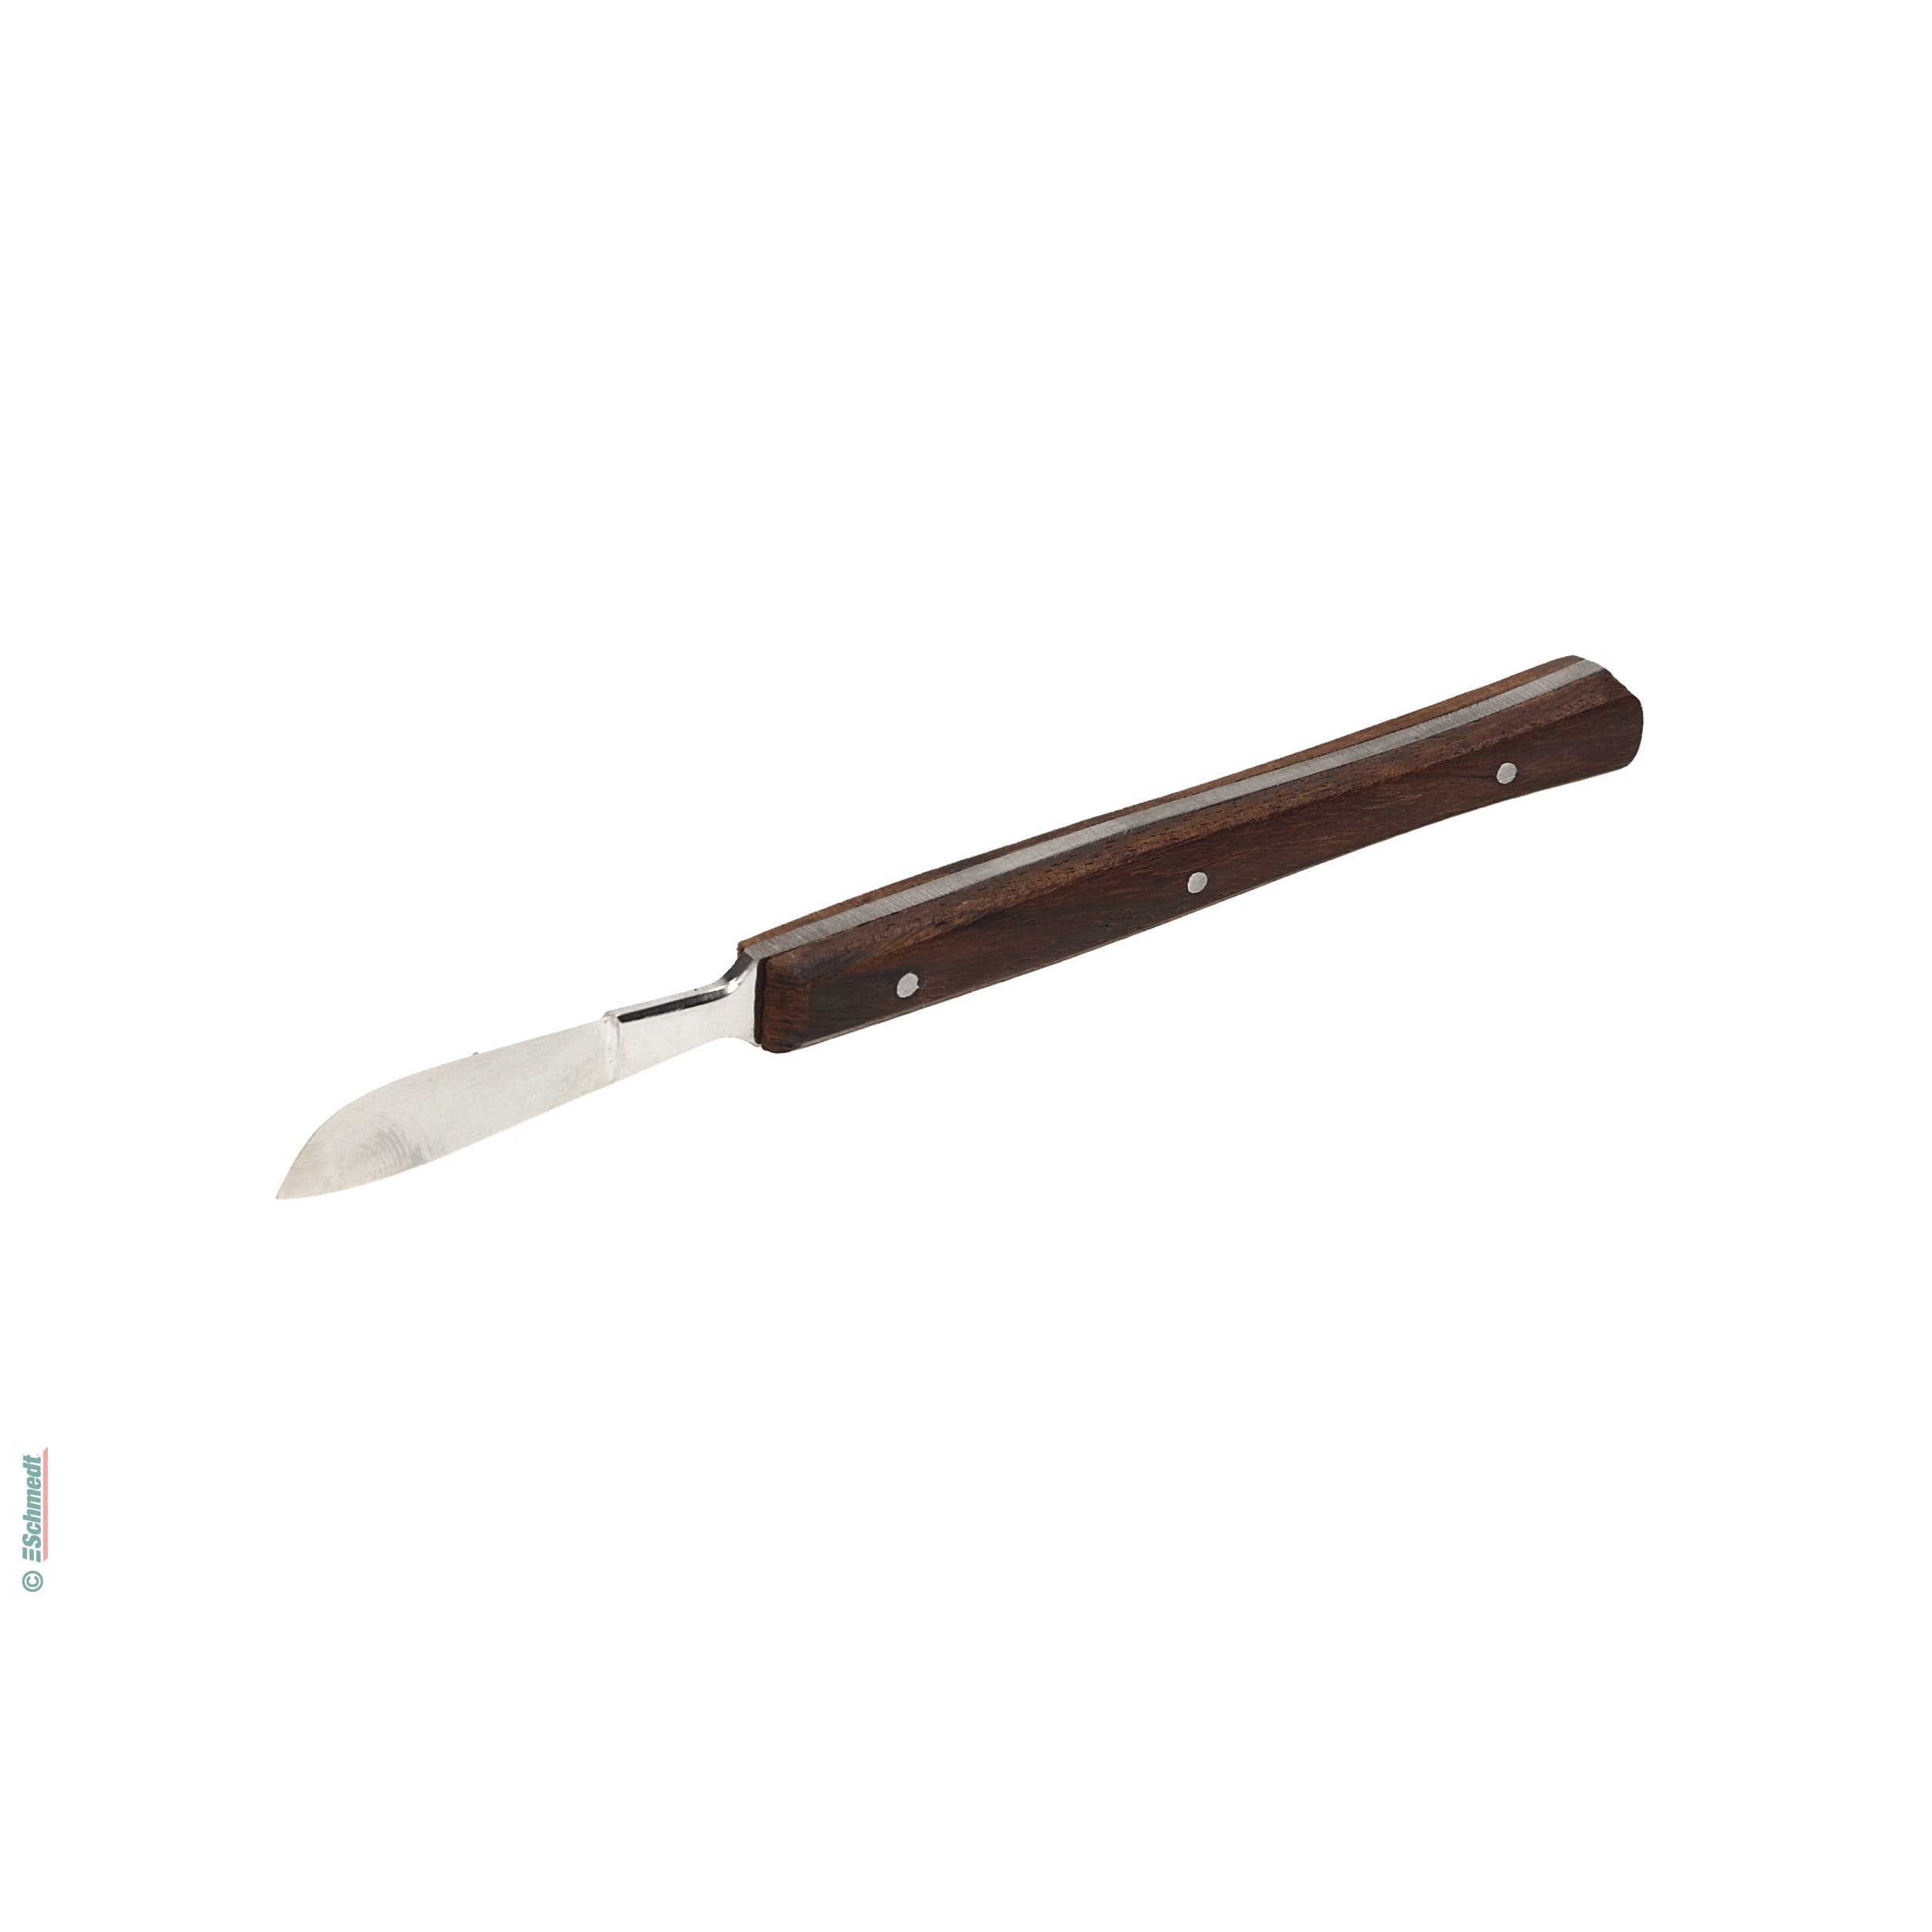 Scalpel with wooden handle - antirust - Total length: 150 mm - for cutting works on paper, cardboard, leather, parchment etc. as well as for...